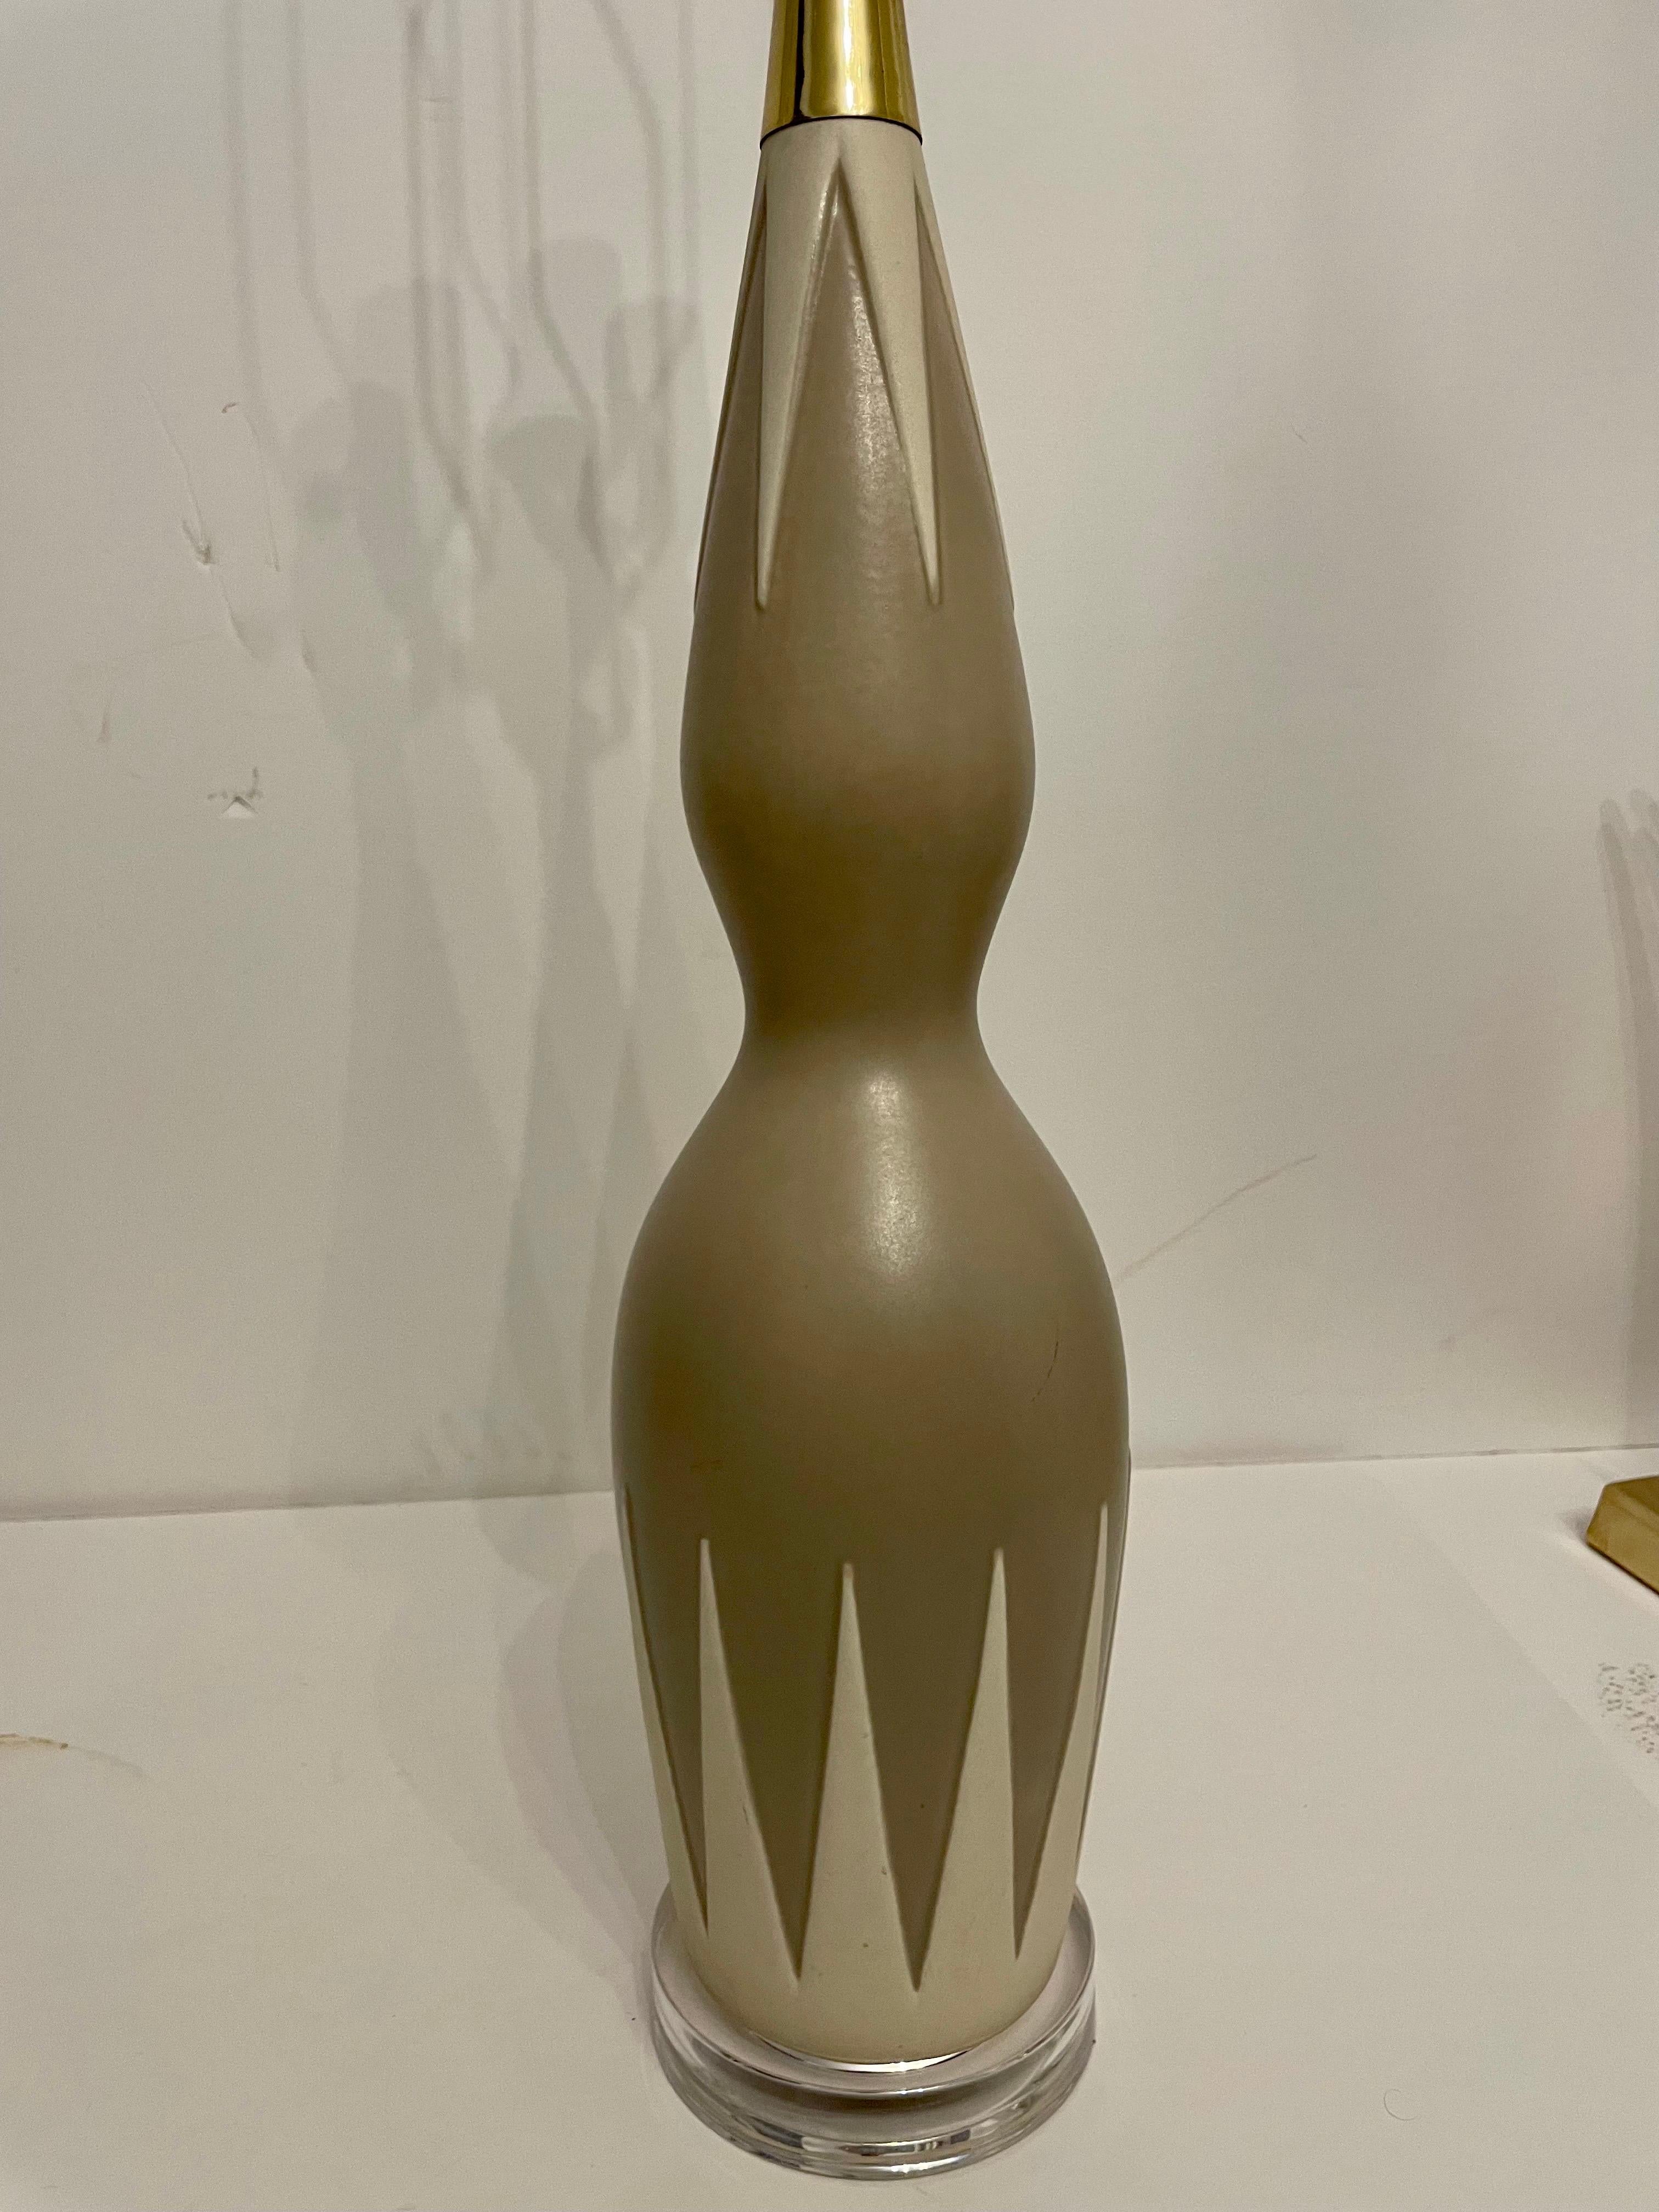 Mid century Hourglass lamp by Gerald Thurston for Lightolier with Lucite base, ceramic body and brass fittings. New 3 way brass socket and wiring. Original solid brass finial. Shade not included. Good overall condition, few light rubs to finish. 6